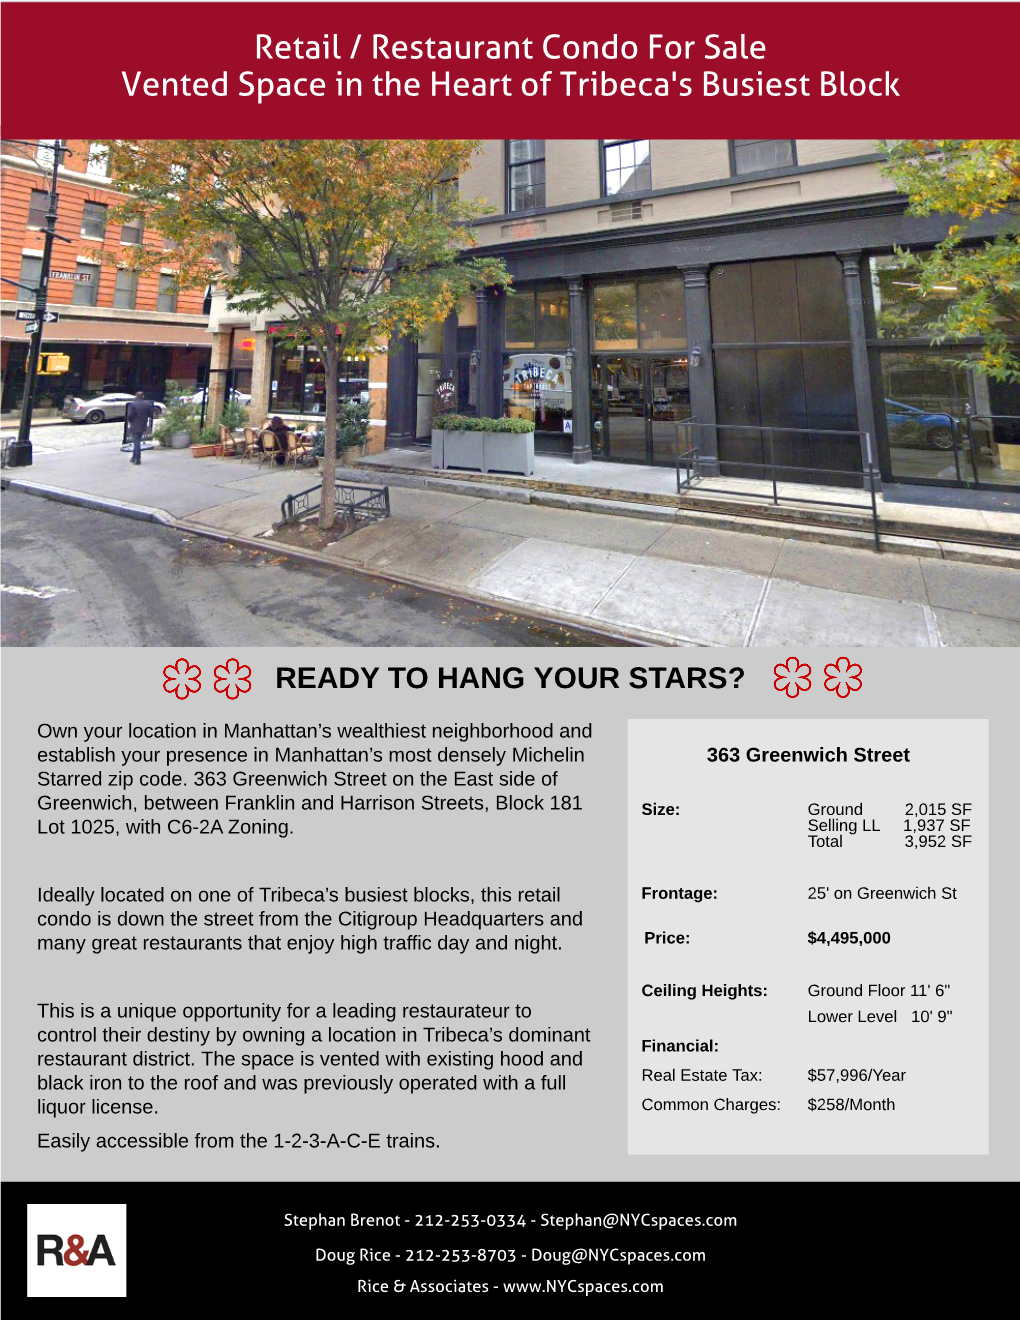 Retail / Restaurant Condo for Sale Vented Space in the Heart of Tribeca's Busiest Block